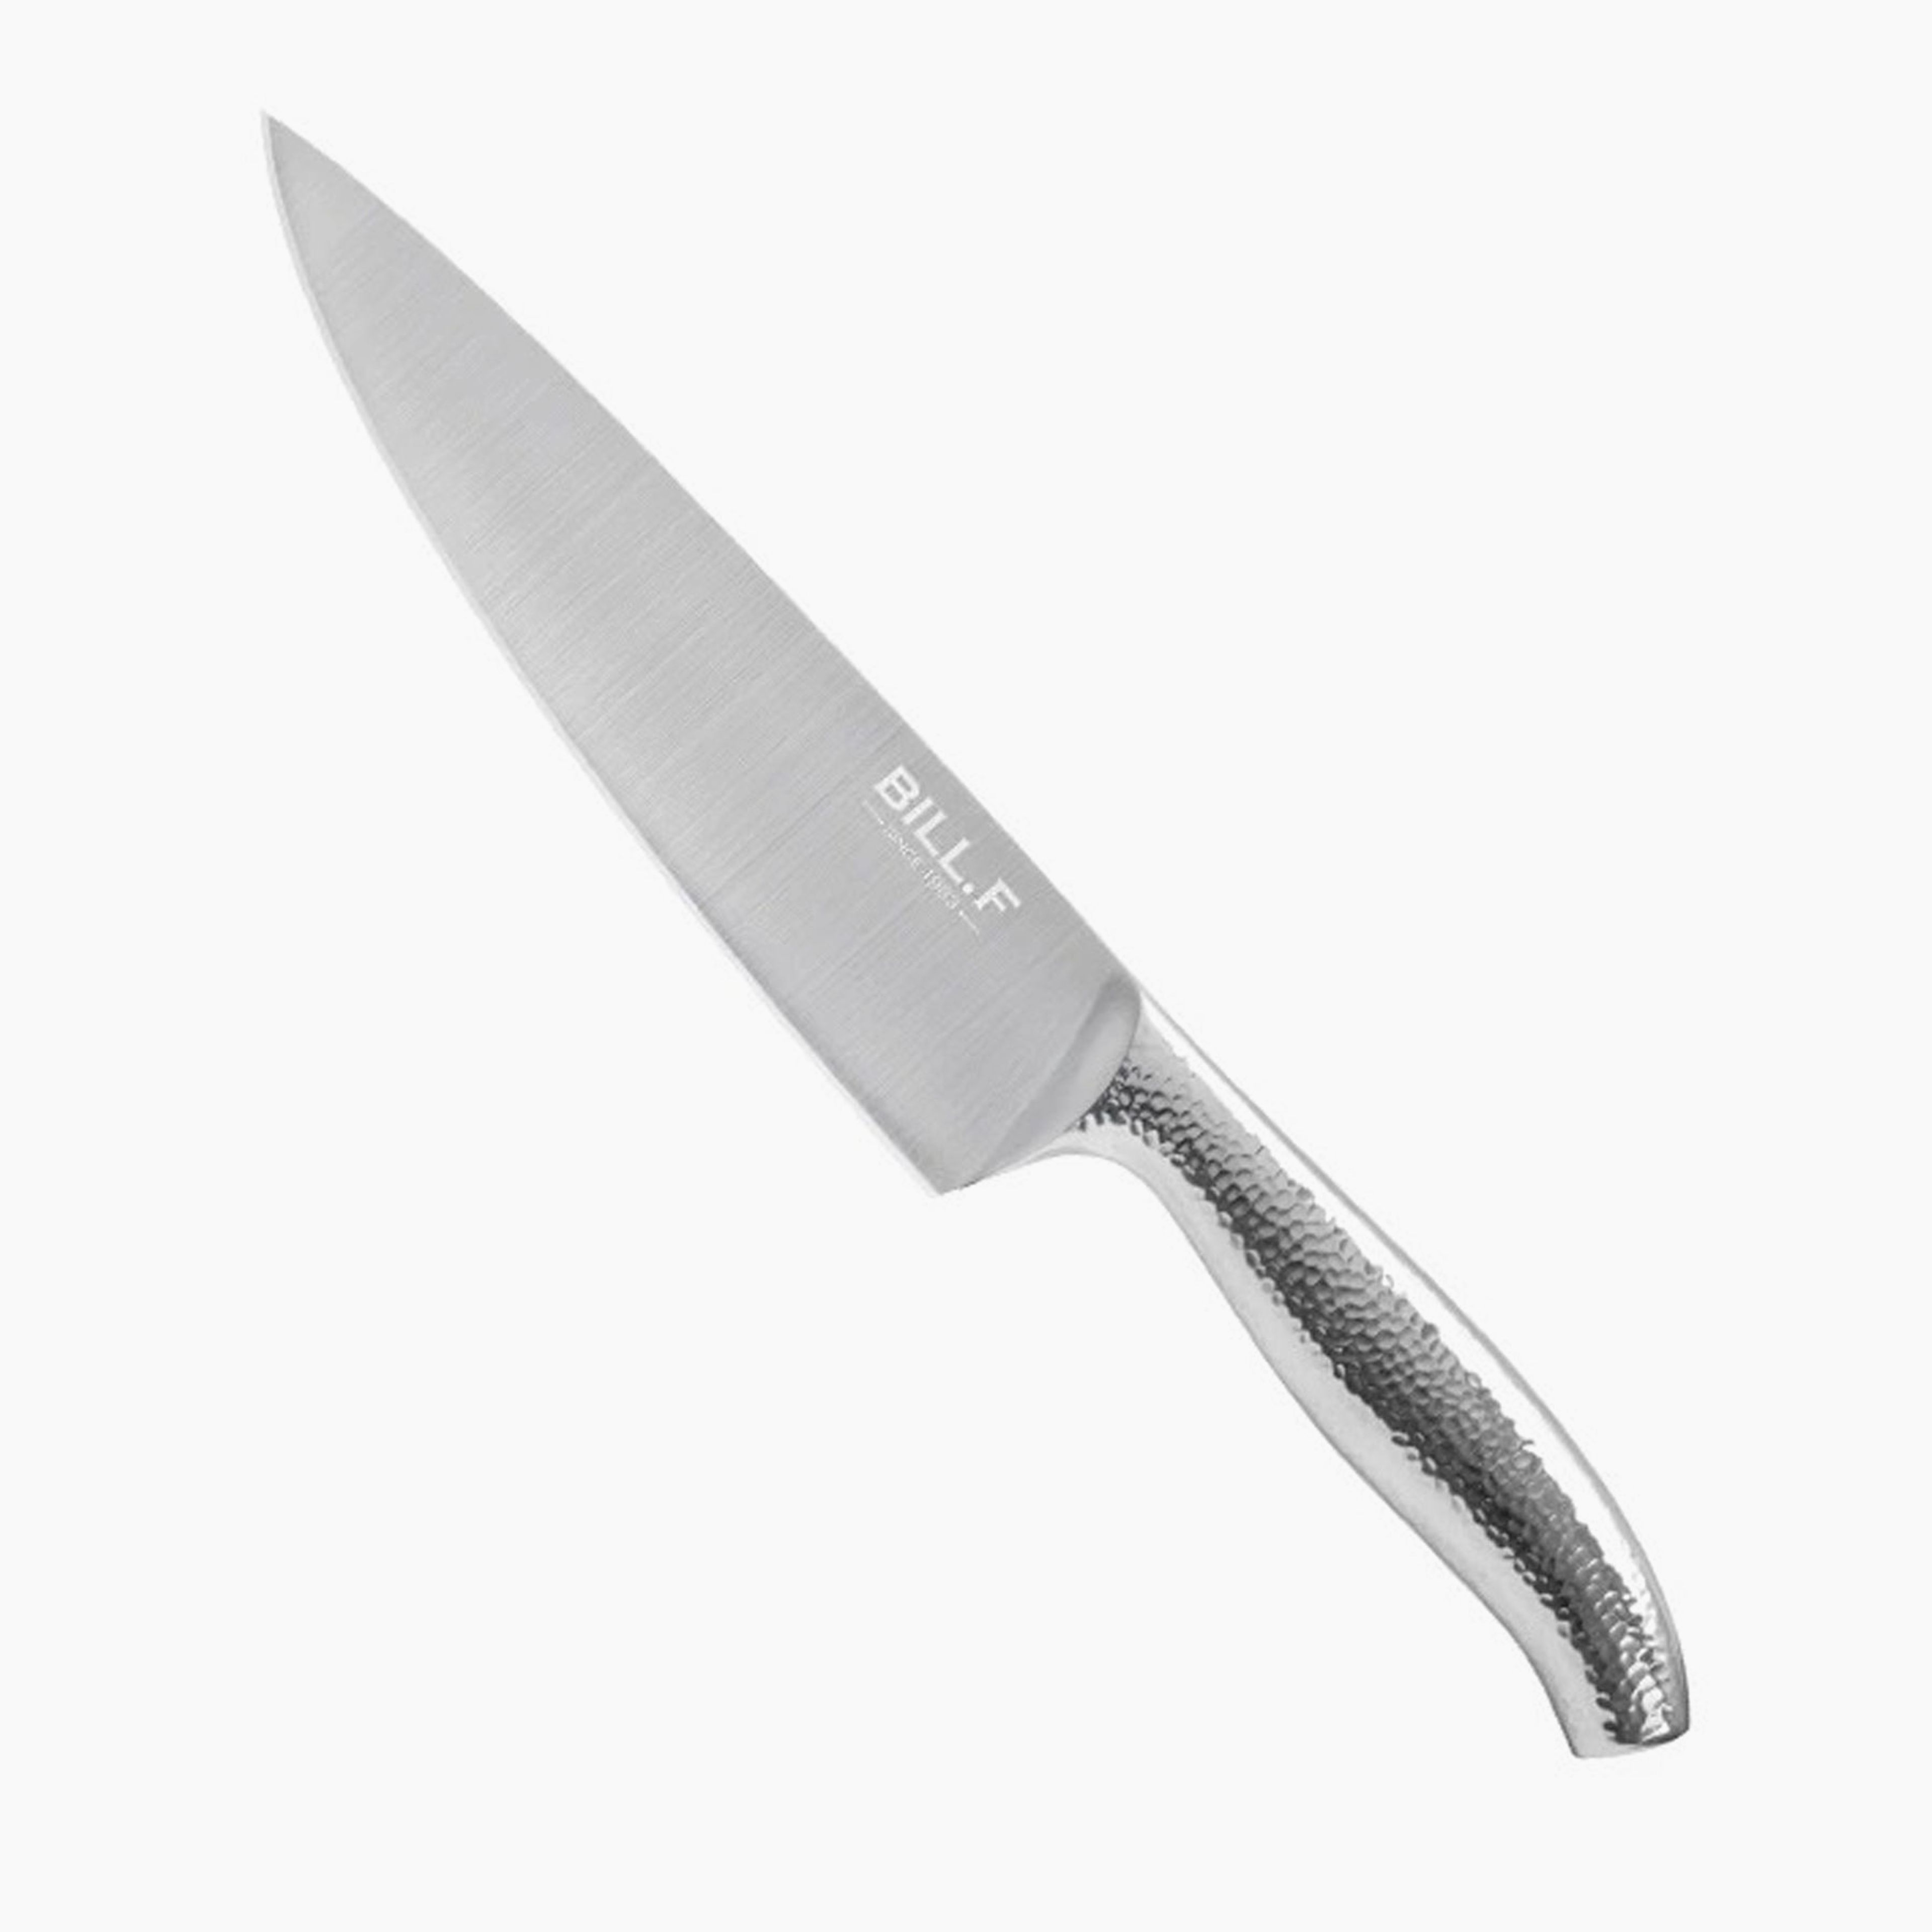 Buy 1 get 1 FREE - 8-Inch Chef's Knife